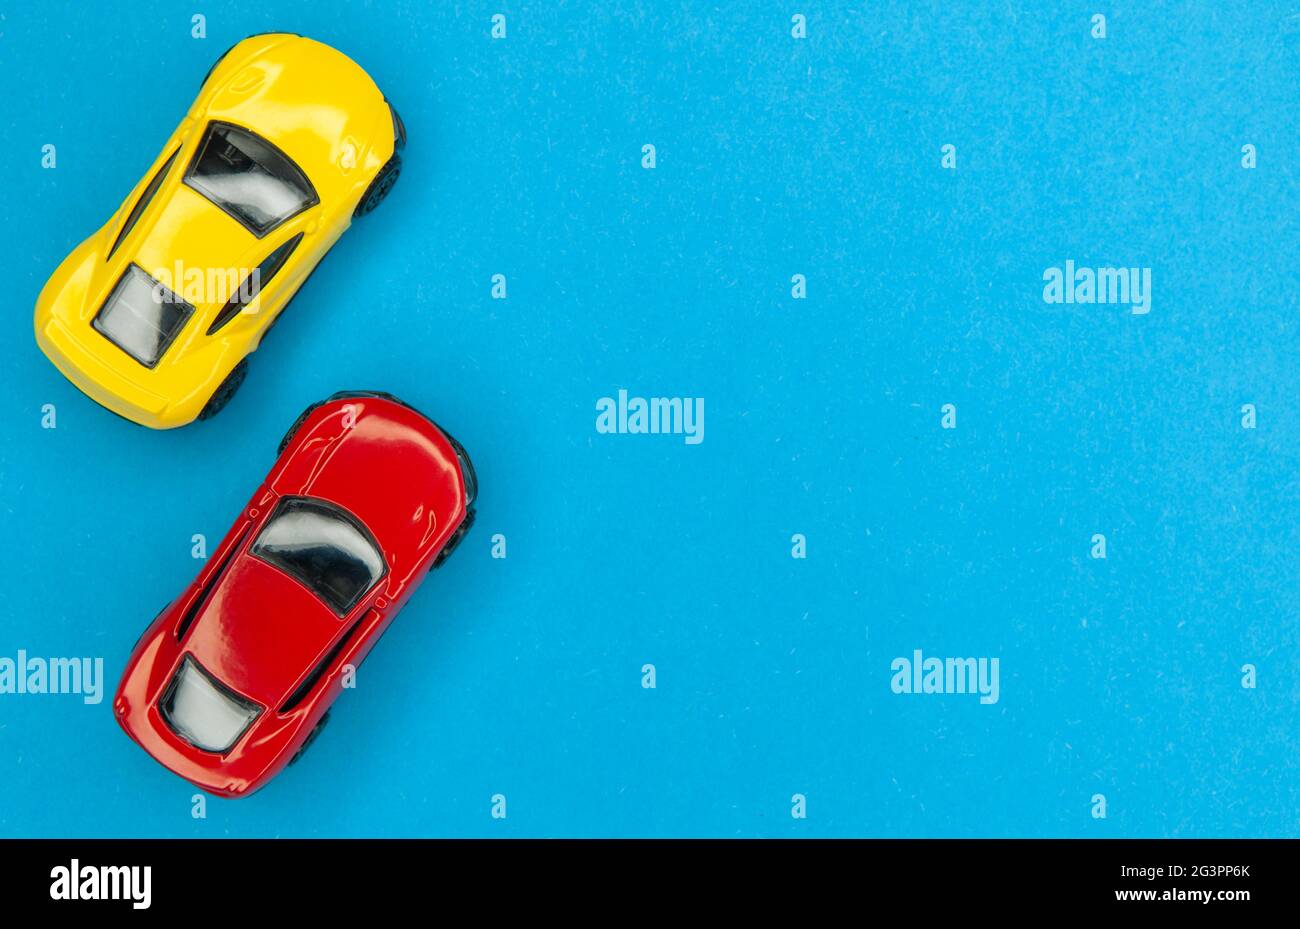 Yellow and red toy cars on a blue background, top view. Stock Photo